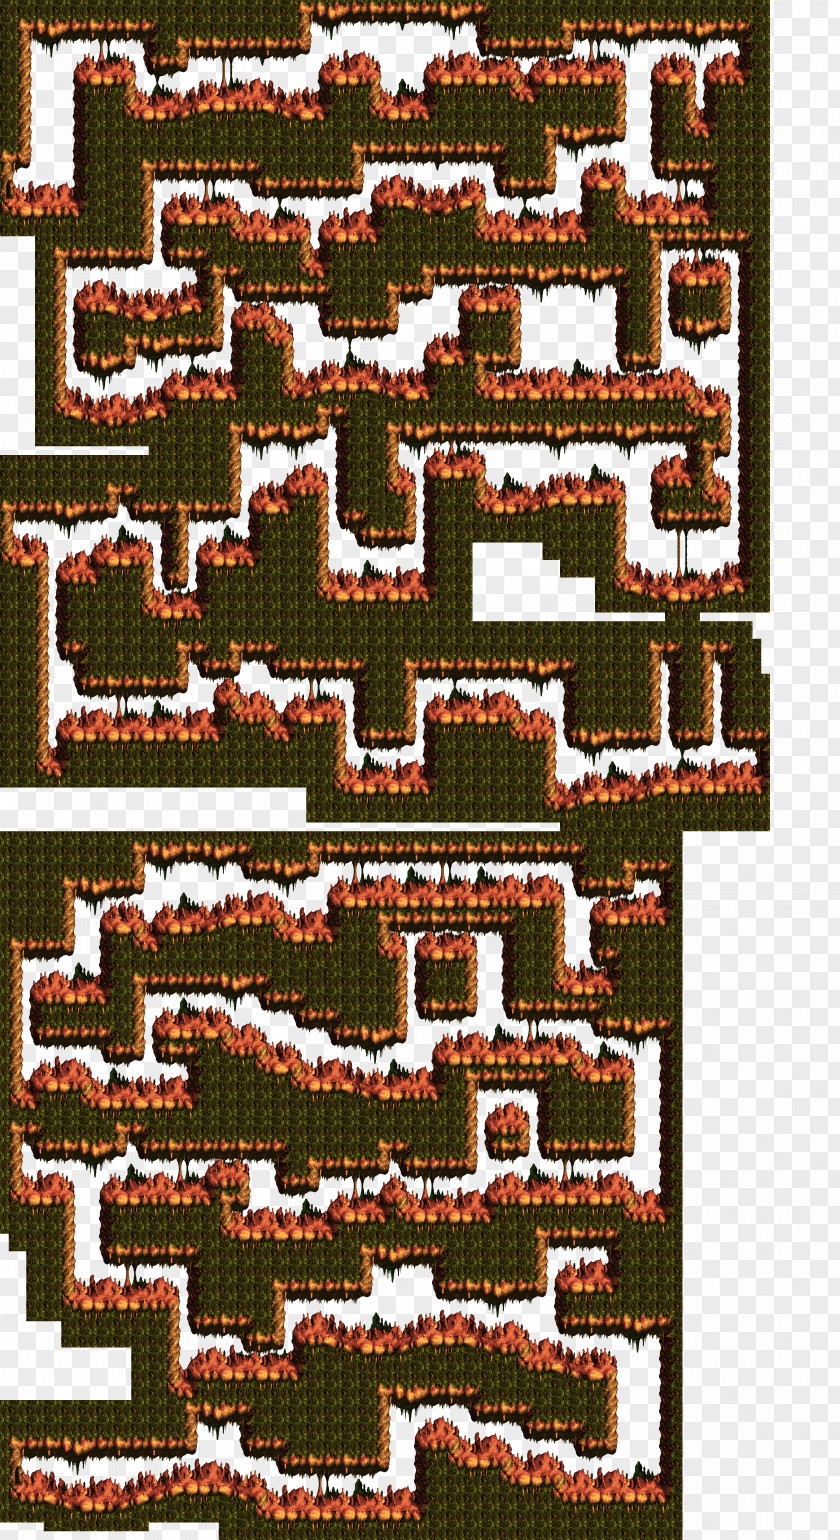 Boardwalk Top View Donkey Kong Country 3: Dixie Kong's Double Trouble! 2: Diddy's Quest Returns Land 2 PNG